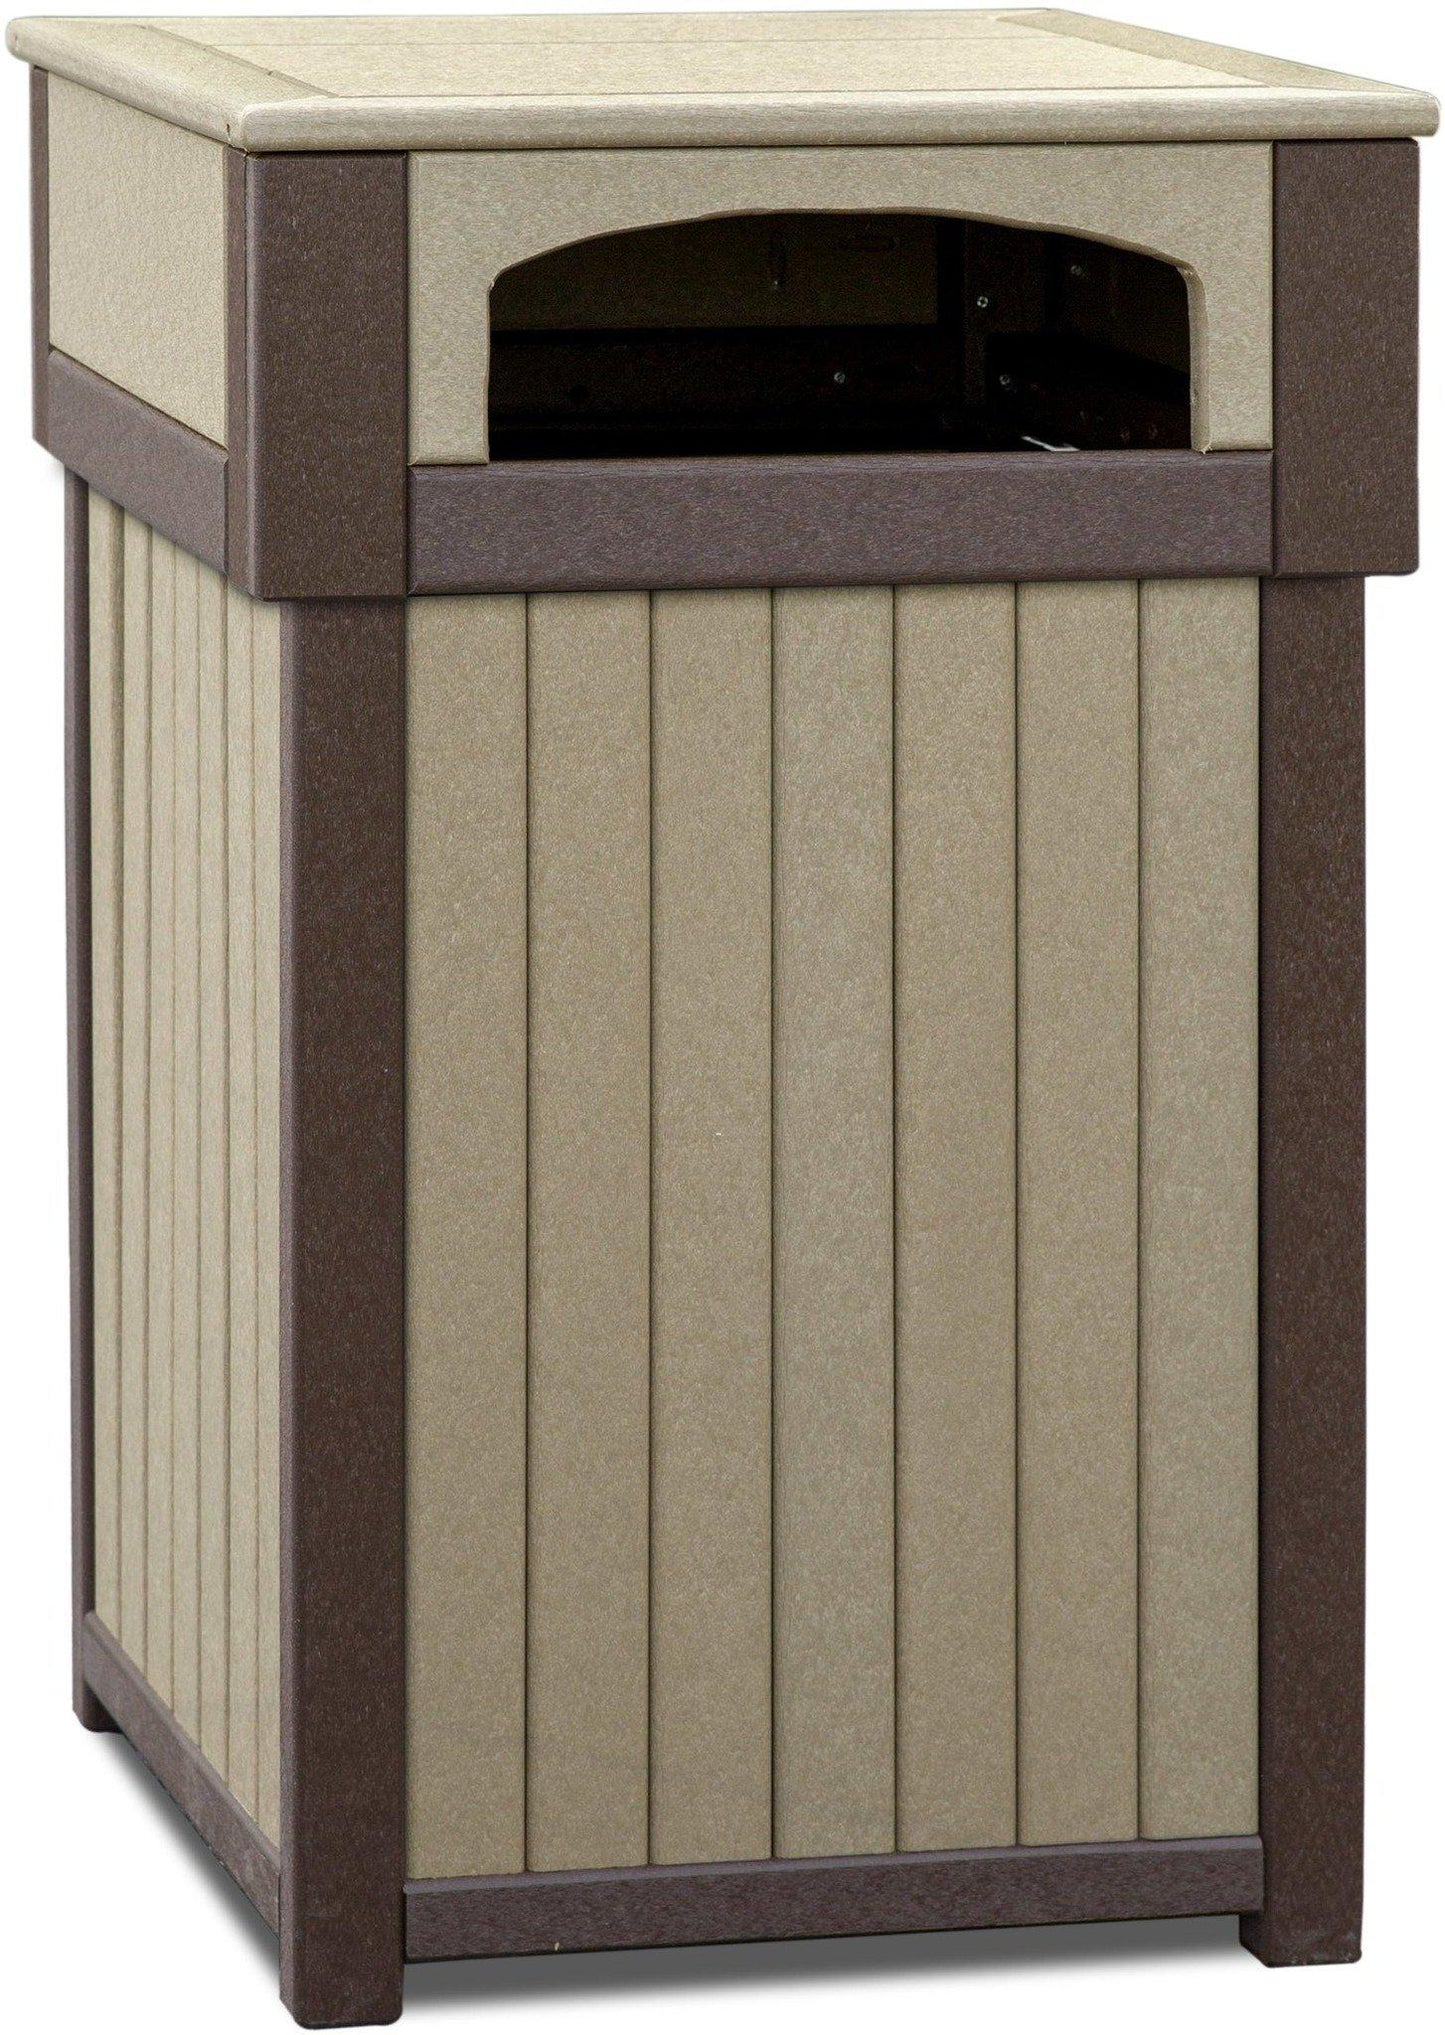 Leisure Lawns Amish Made Recycled Plastic Commercial Trash Receptacle (One Hole) Model #931 - LEAD TIME TO SHIP 4 WEEKS OR LESS